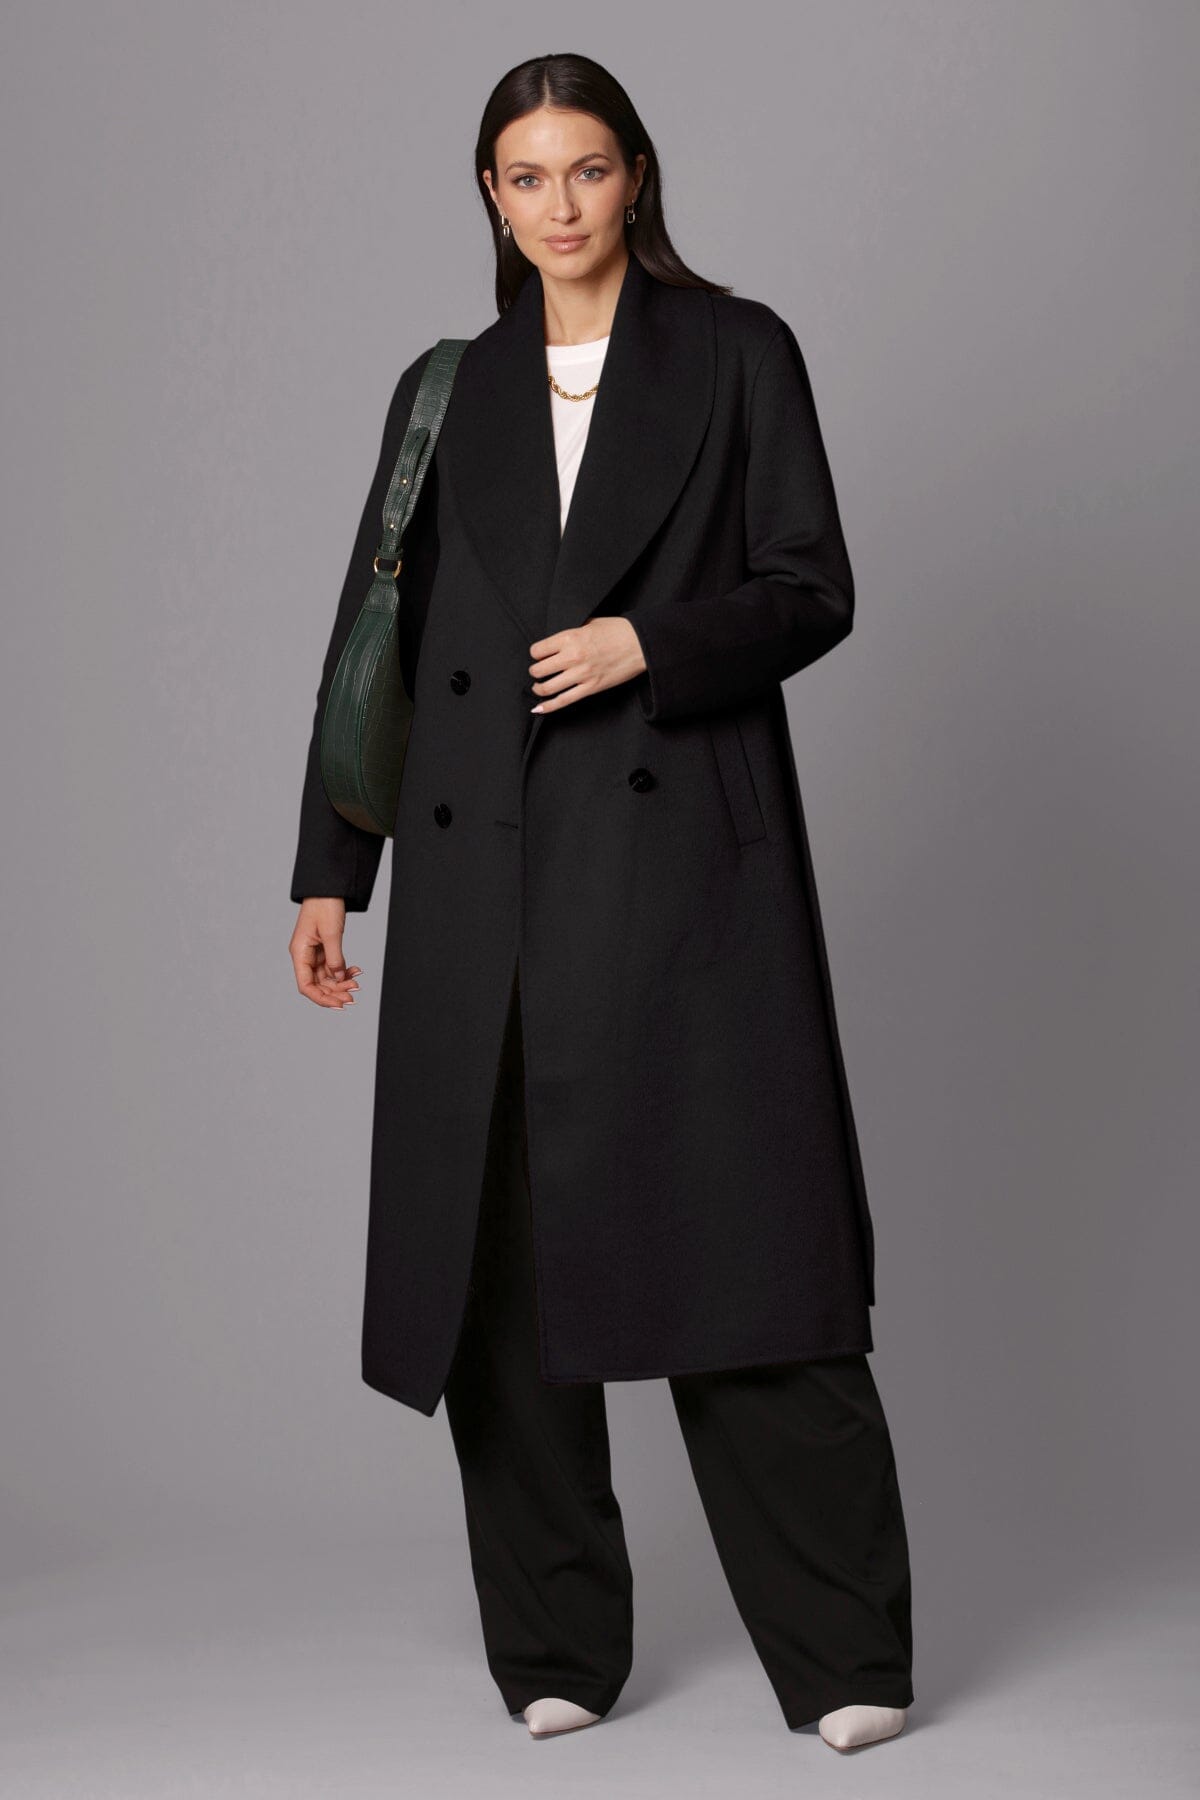 black double face wrap mid length coat - figure flattering office to date night coats outerwear for women